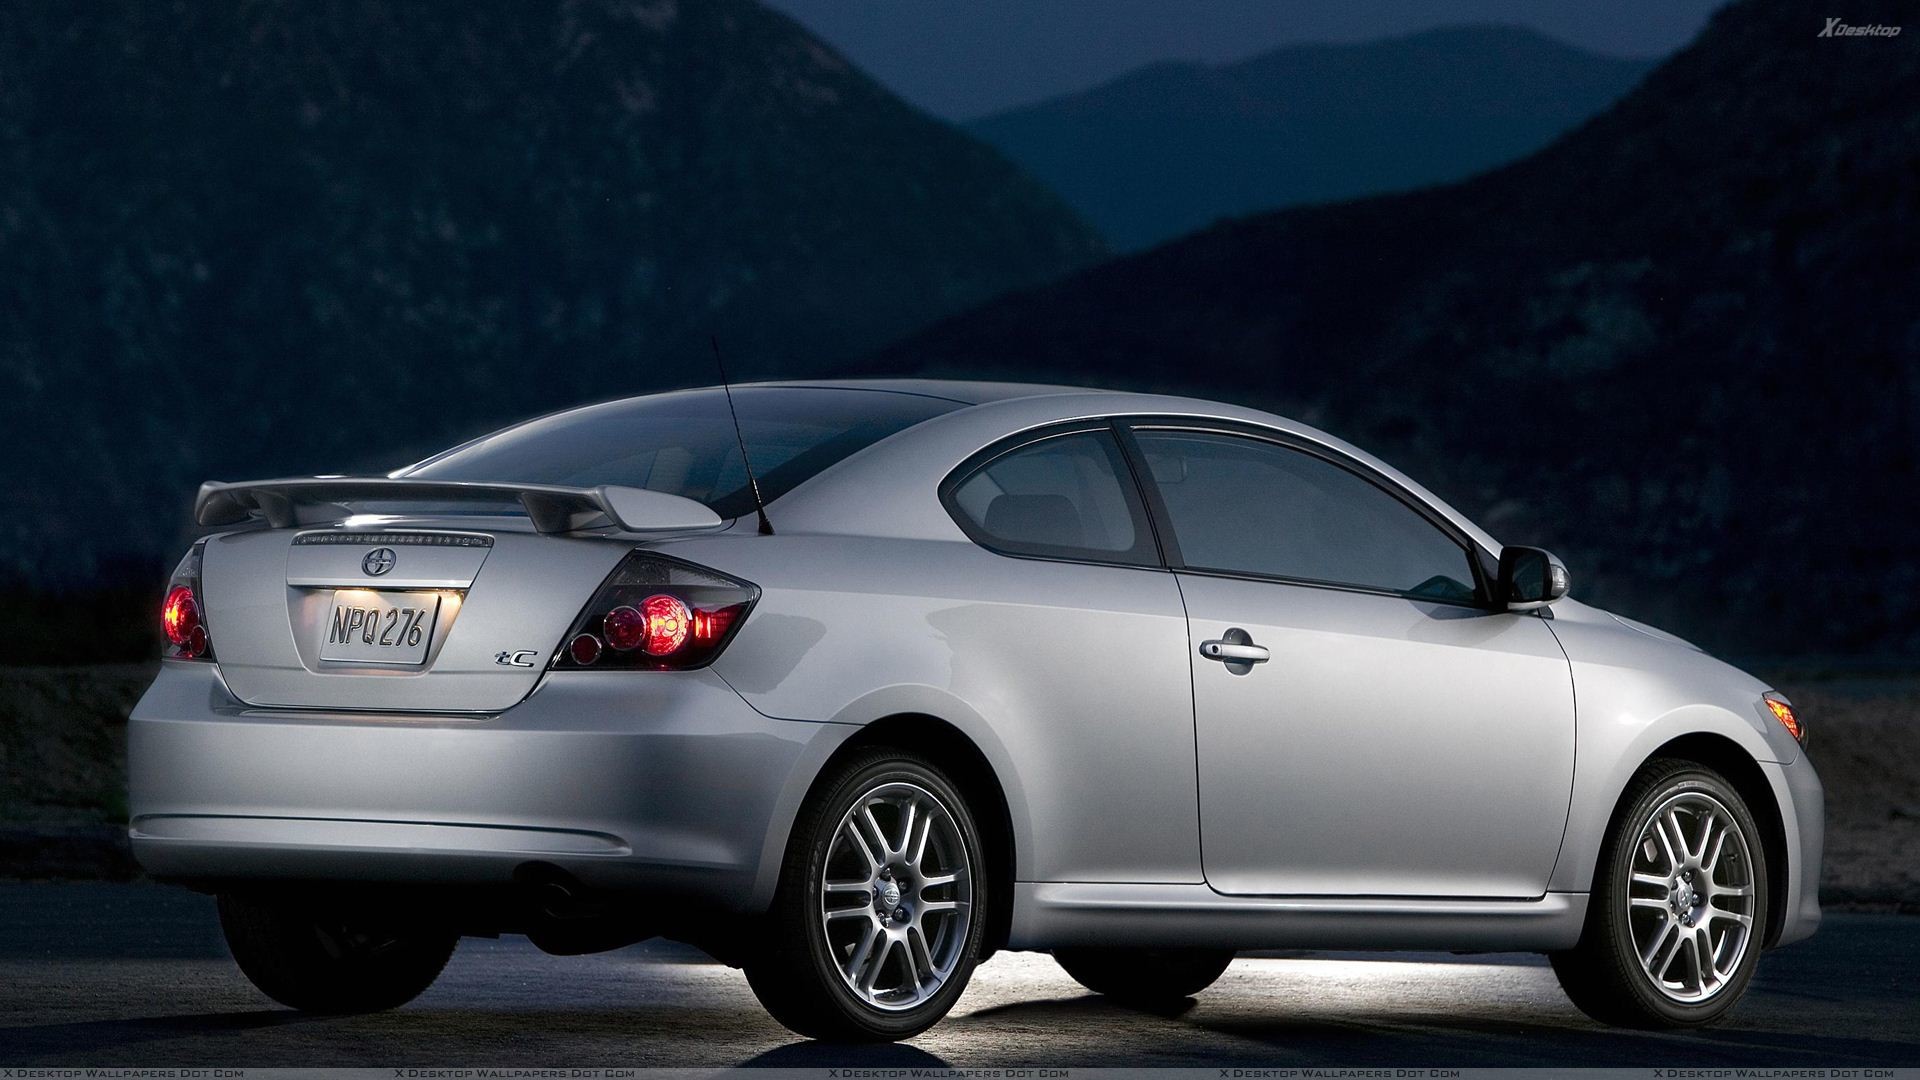 1920x1080 You are viewing wallpaper titled "2009 Scion TC ...